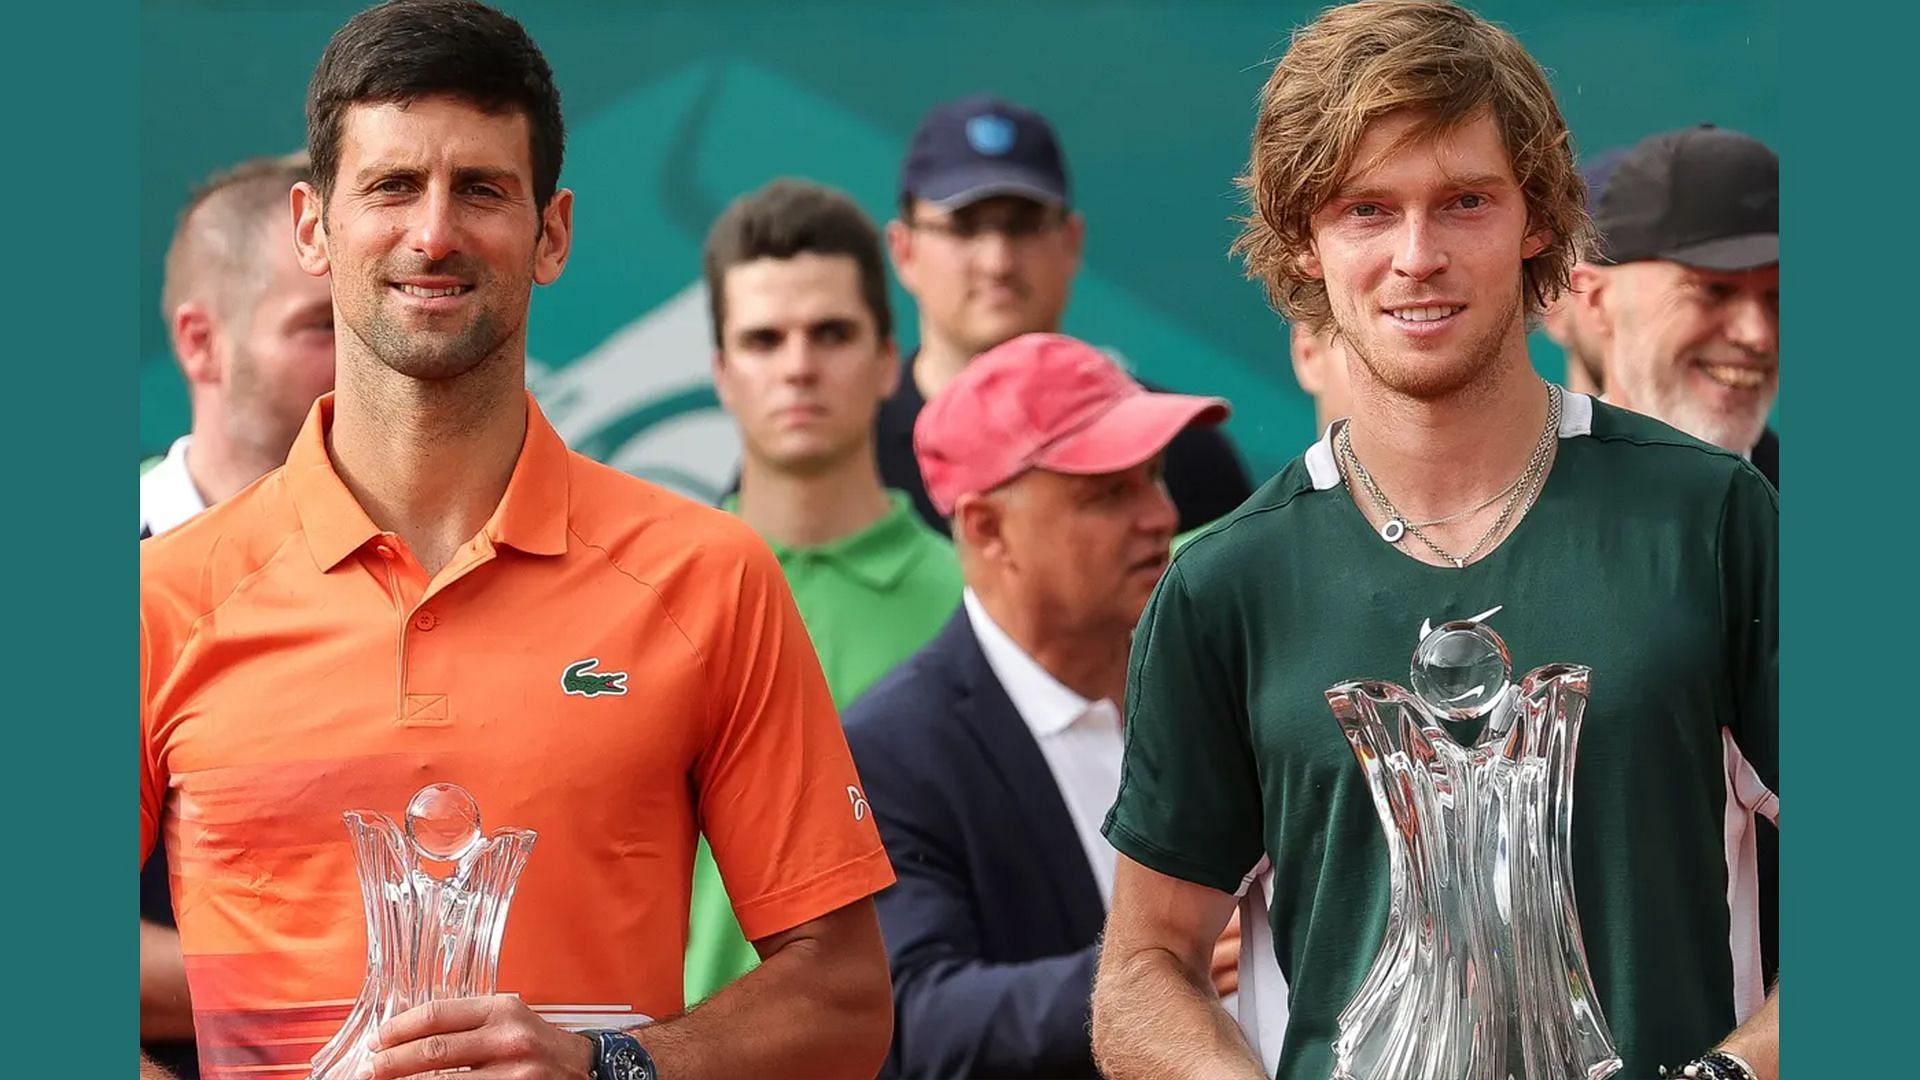 Novak Djokovic vs Andrey Rublev Where to watch, TV schedule, live streaming details and more 2022 ATP Finals